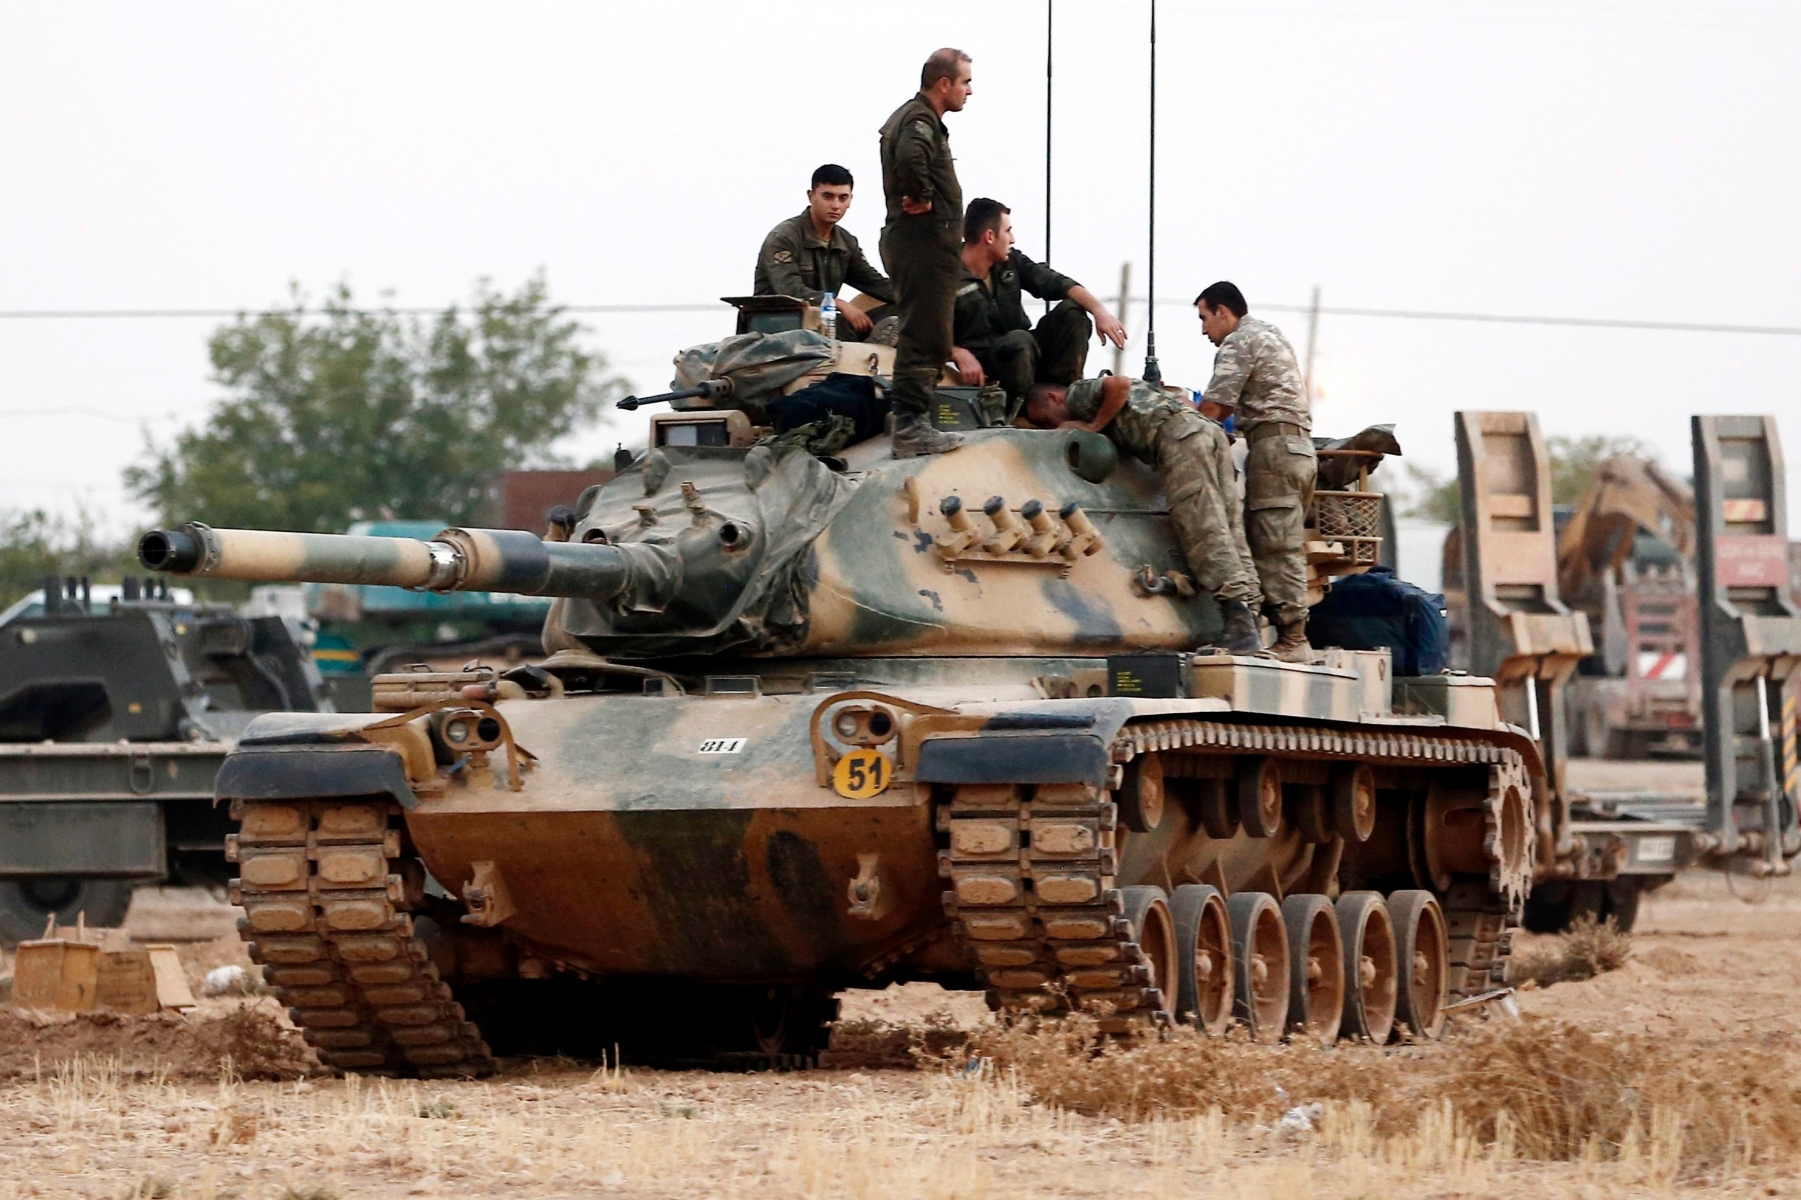 epa05508856 Turkish soldiers stand on tanks at the Syrian border as part of their offensive against the so-called Islamic State (ISIS or IS) militant group in Syria, in Karkamis district of Gaziantep, Turkey, 24 August 2016. The Turkish army launched an offensive operation against ISIS in Syria's Jarablus with its war jets and army troops in coordination with the US led coalition war planes.  EPA/SEDAT SUNA TURKEY SYRIA ISIS CONFLICT WAR